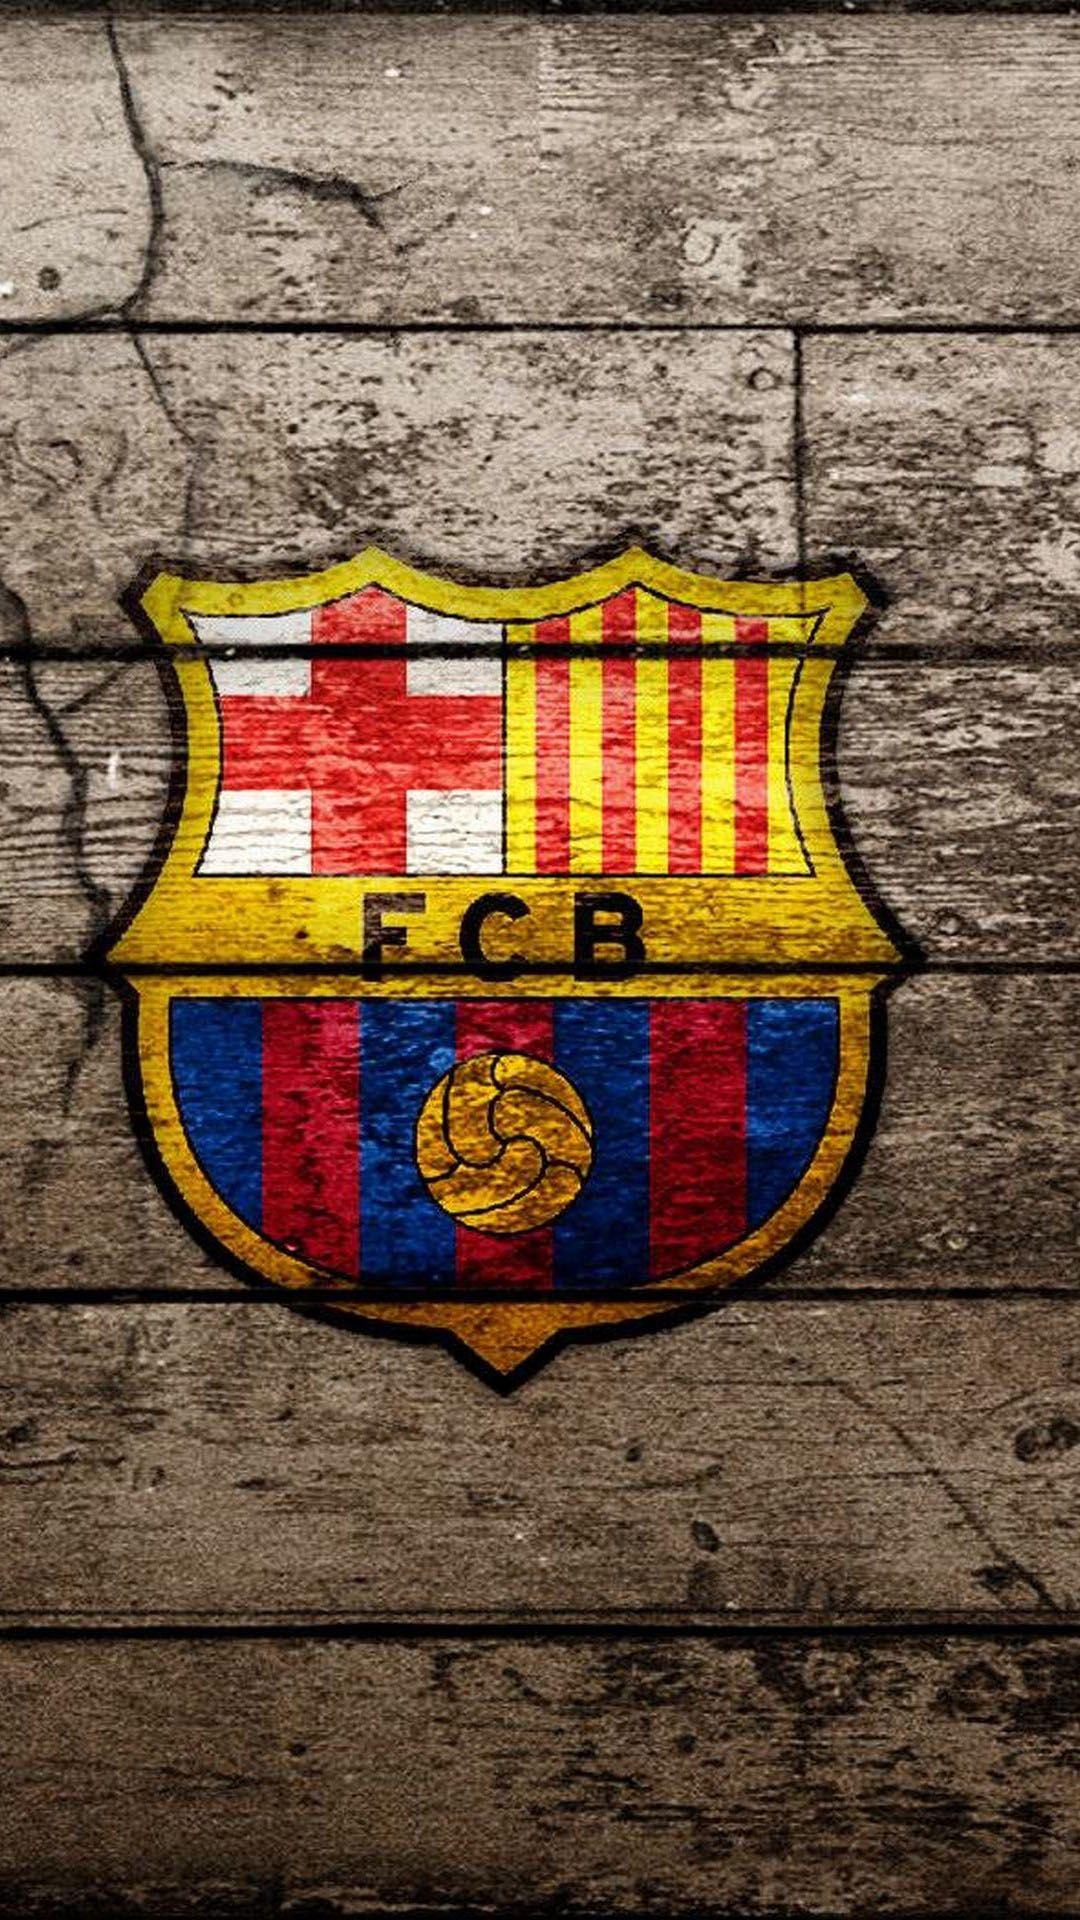 Barcelona Fc Wallpaper for iPhone iPhone 7 plus, iPhone 6 plus